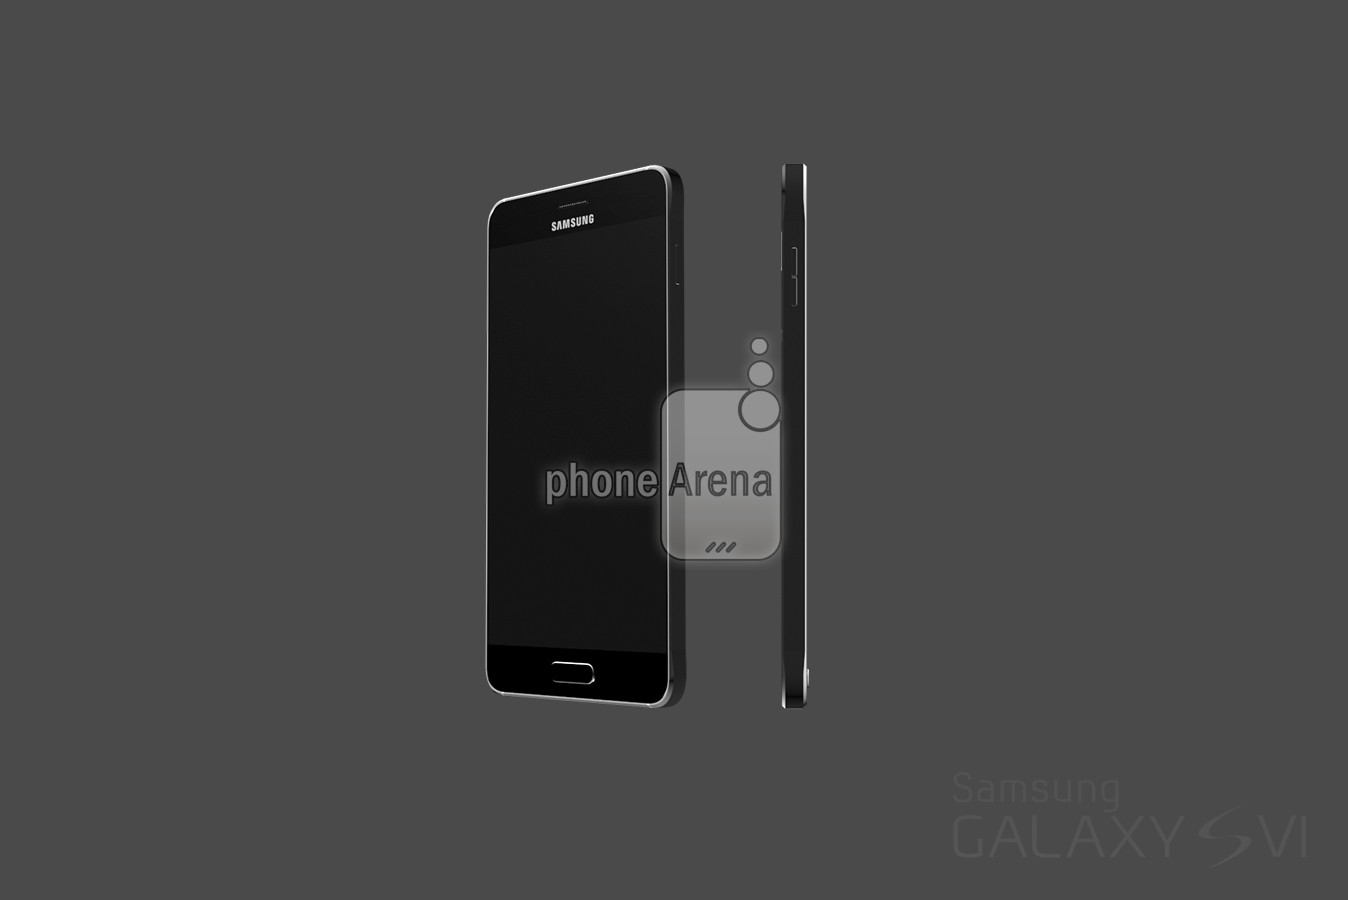 Alleged Galaxy S6 renders 2 - Leaked Images and Renders Show the Upcoming Galaxy S6 along with a few Covers